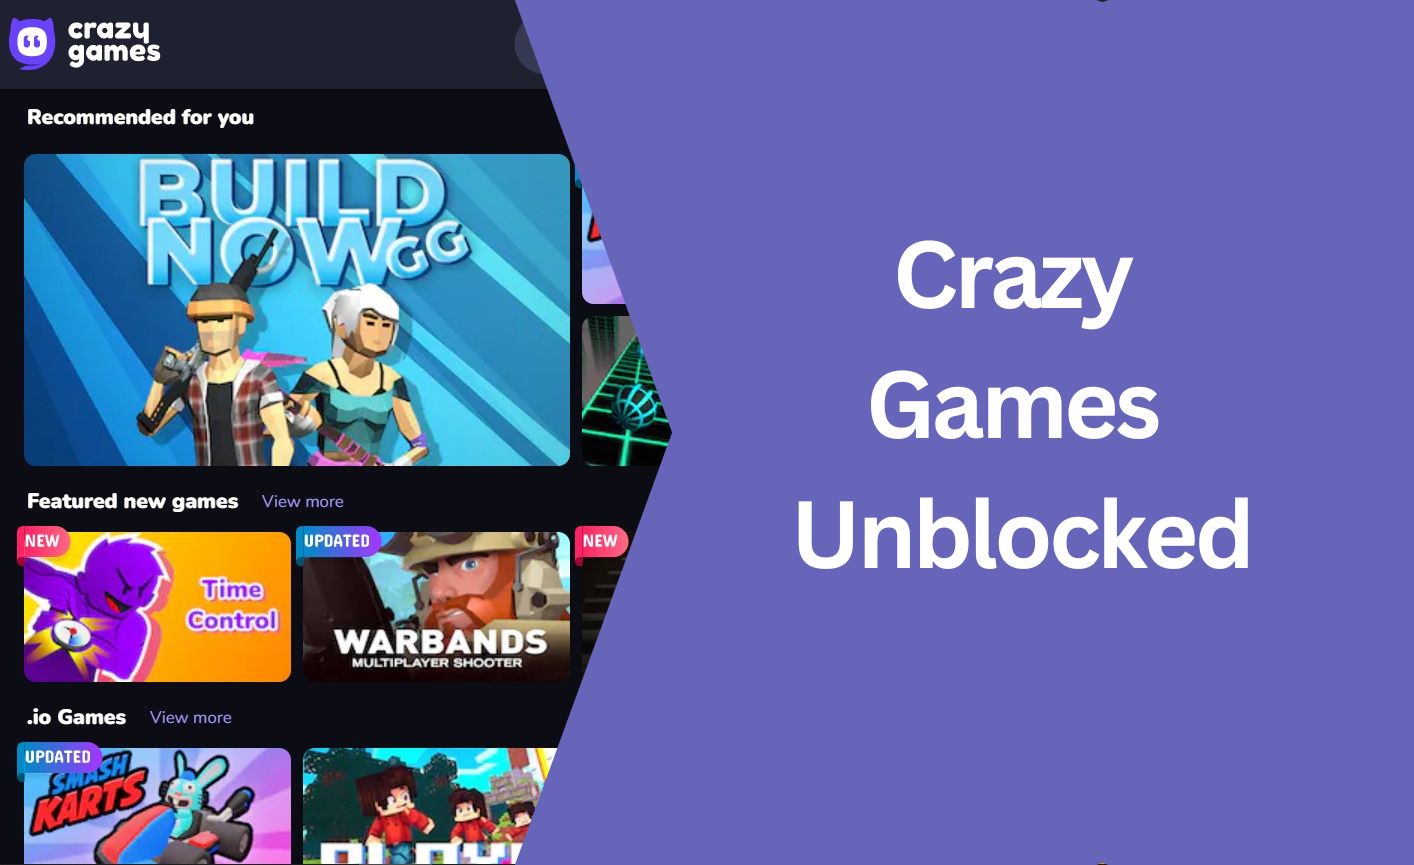 Crazy Games Unblocked Discover the Top Fun and Exciting Games Without Limits 2023